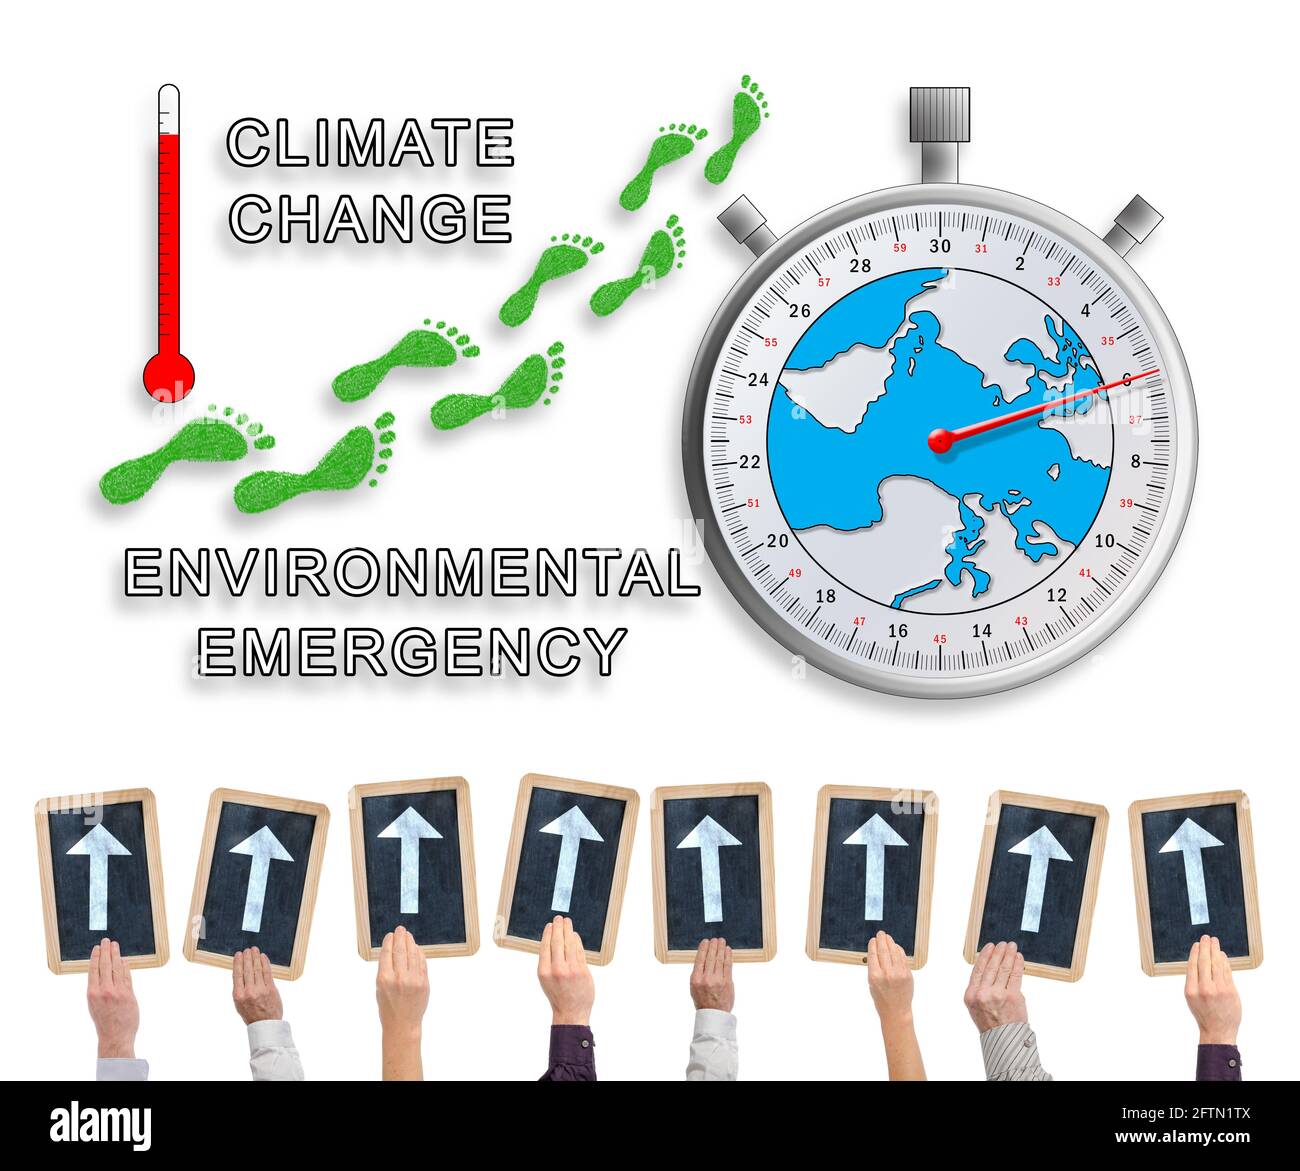 Hands holding writing slates with arrows pointing on global warming concept Stock Photo